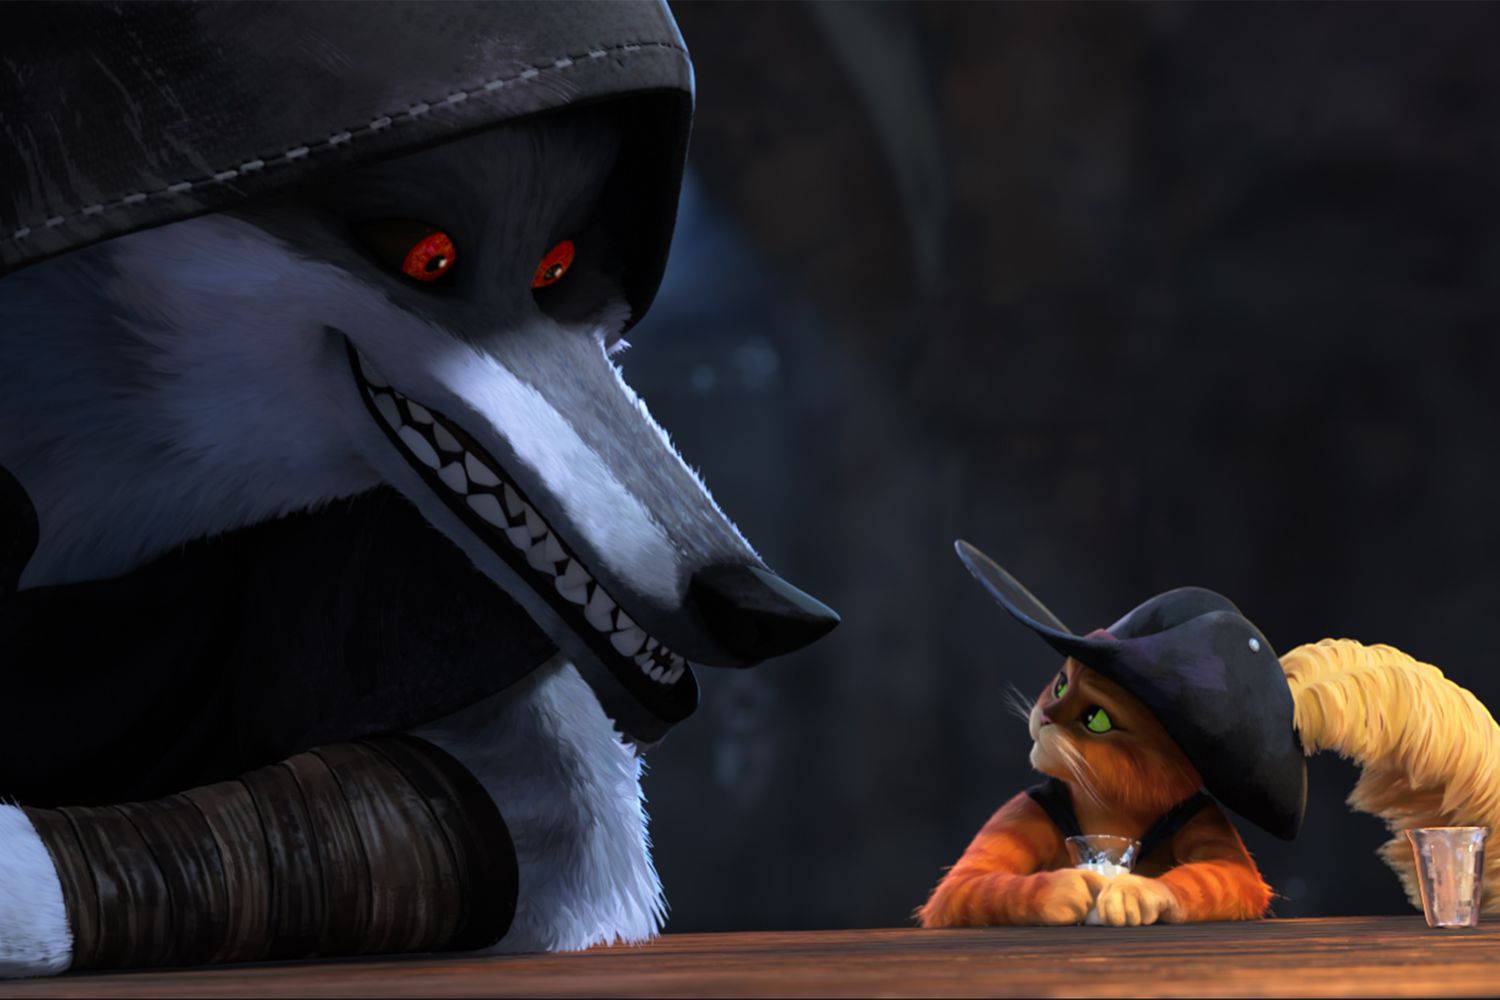 Puss in Boots (Antonio Banderas) in DreamWorks Animation’s Puss in Boots: The Last Wish, directed by Joel Crawford.